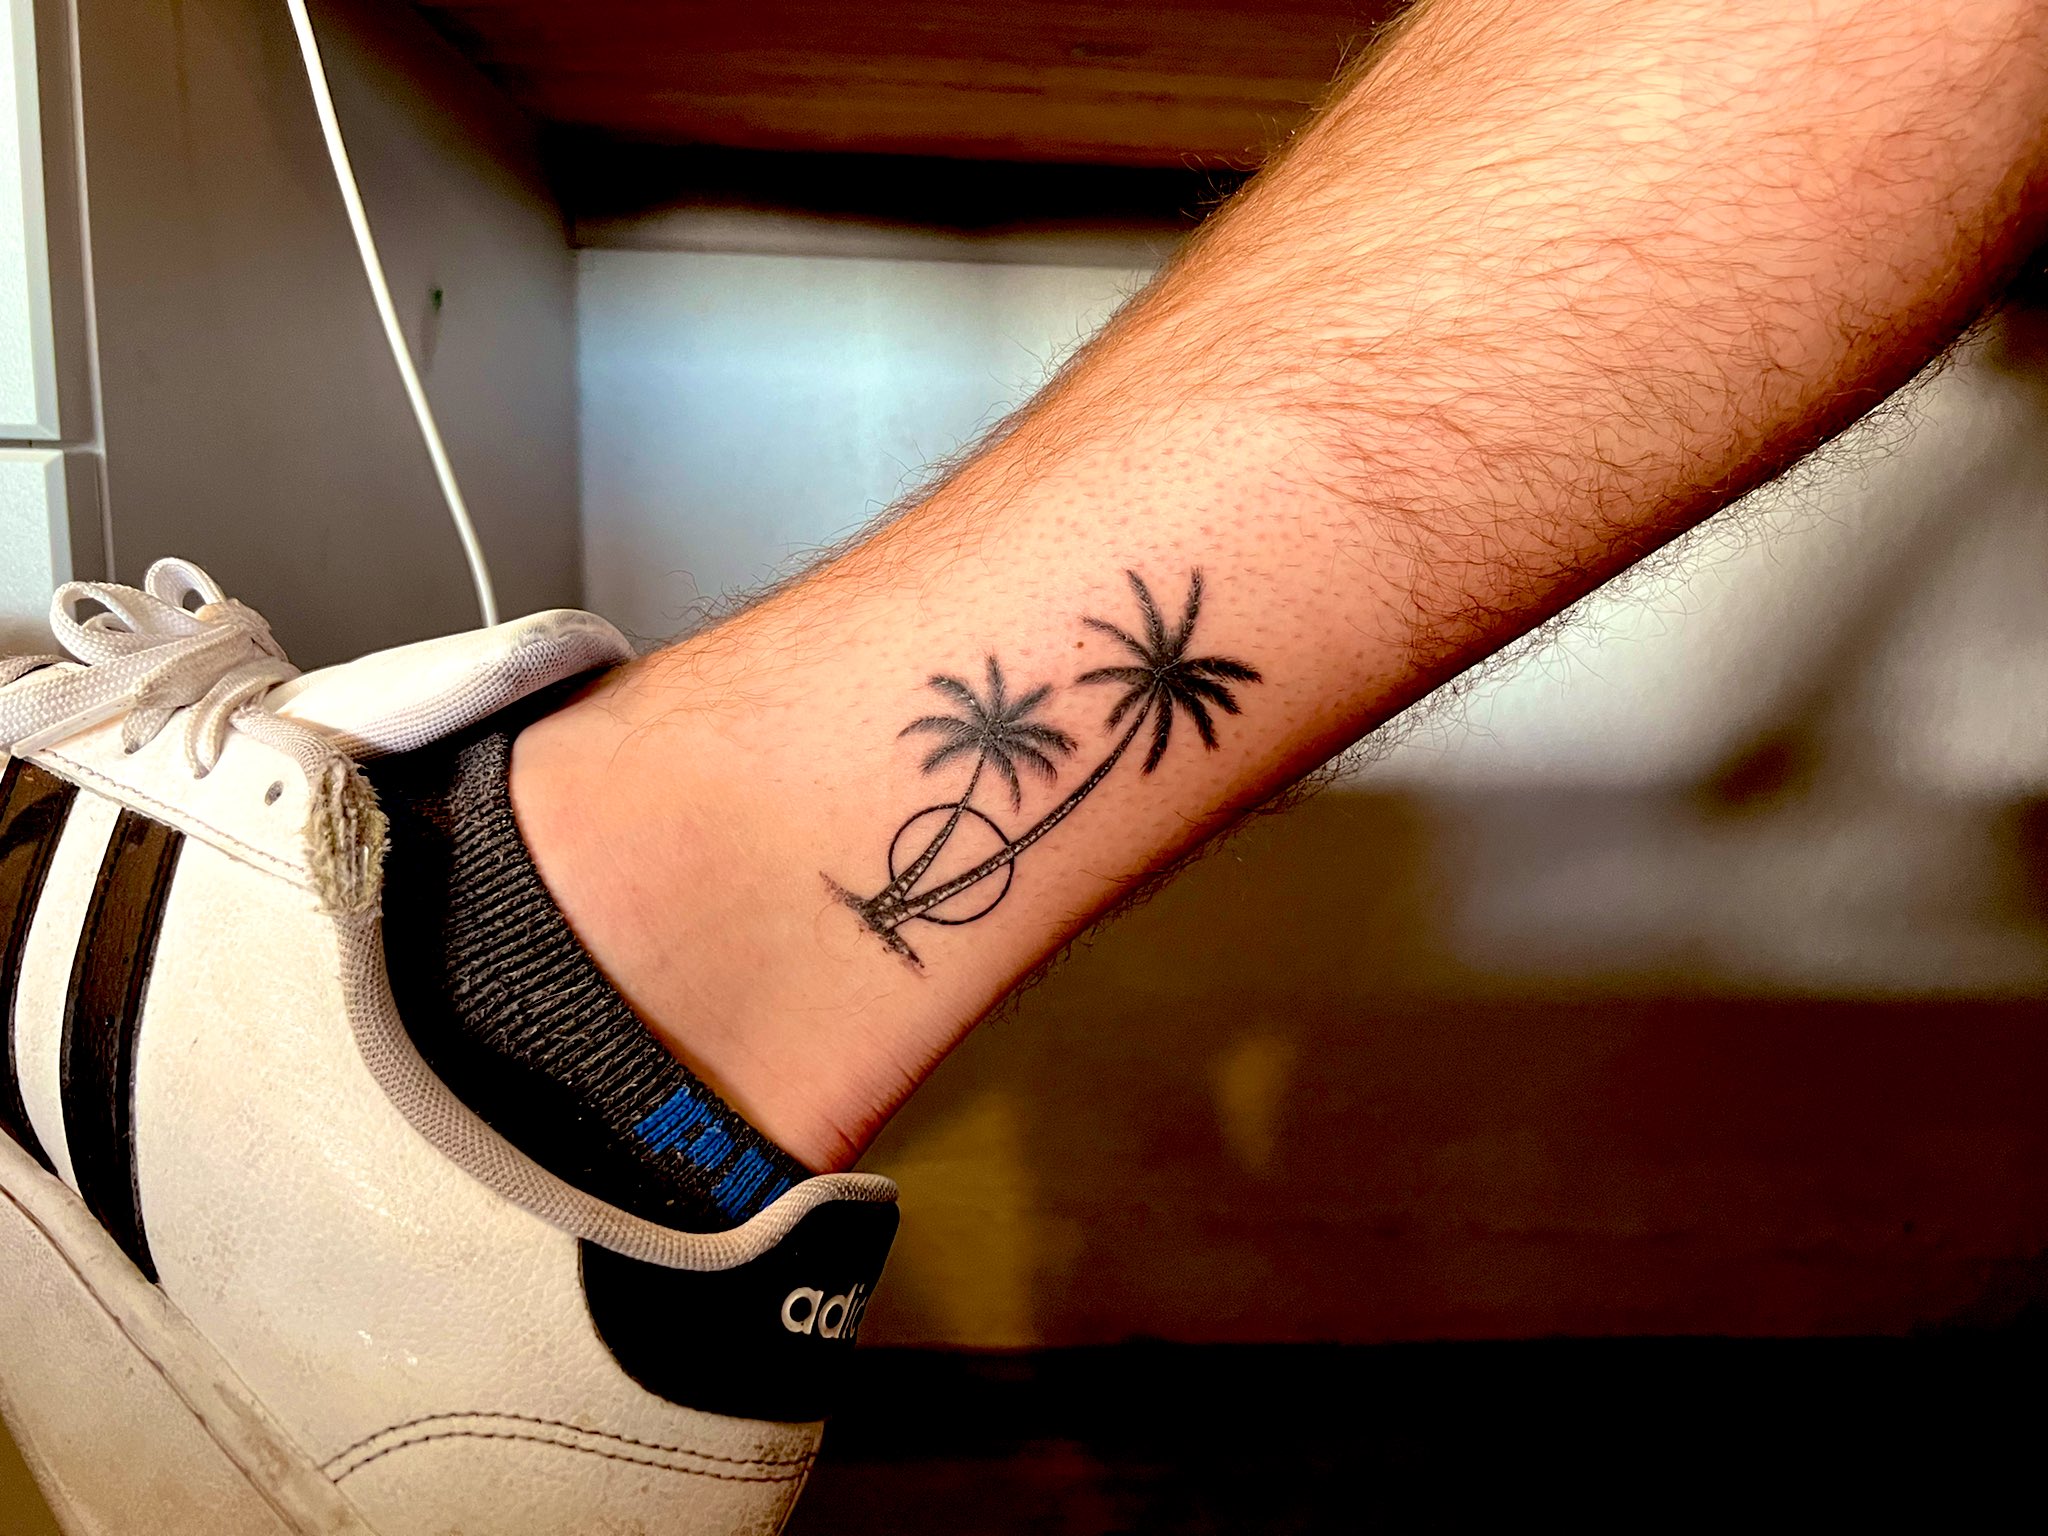 Date and pine tree tattoo located on the wrist.